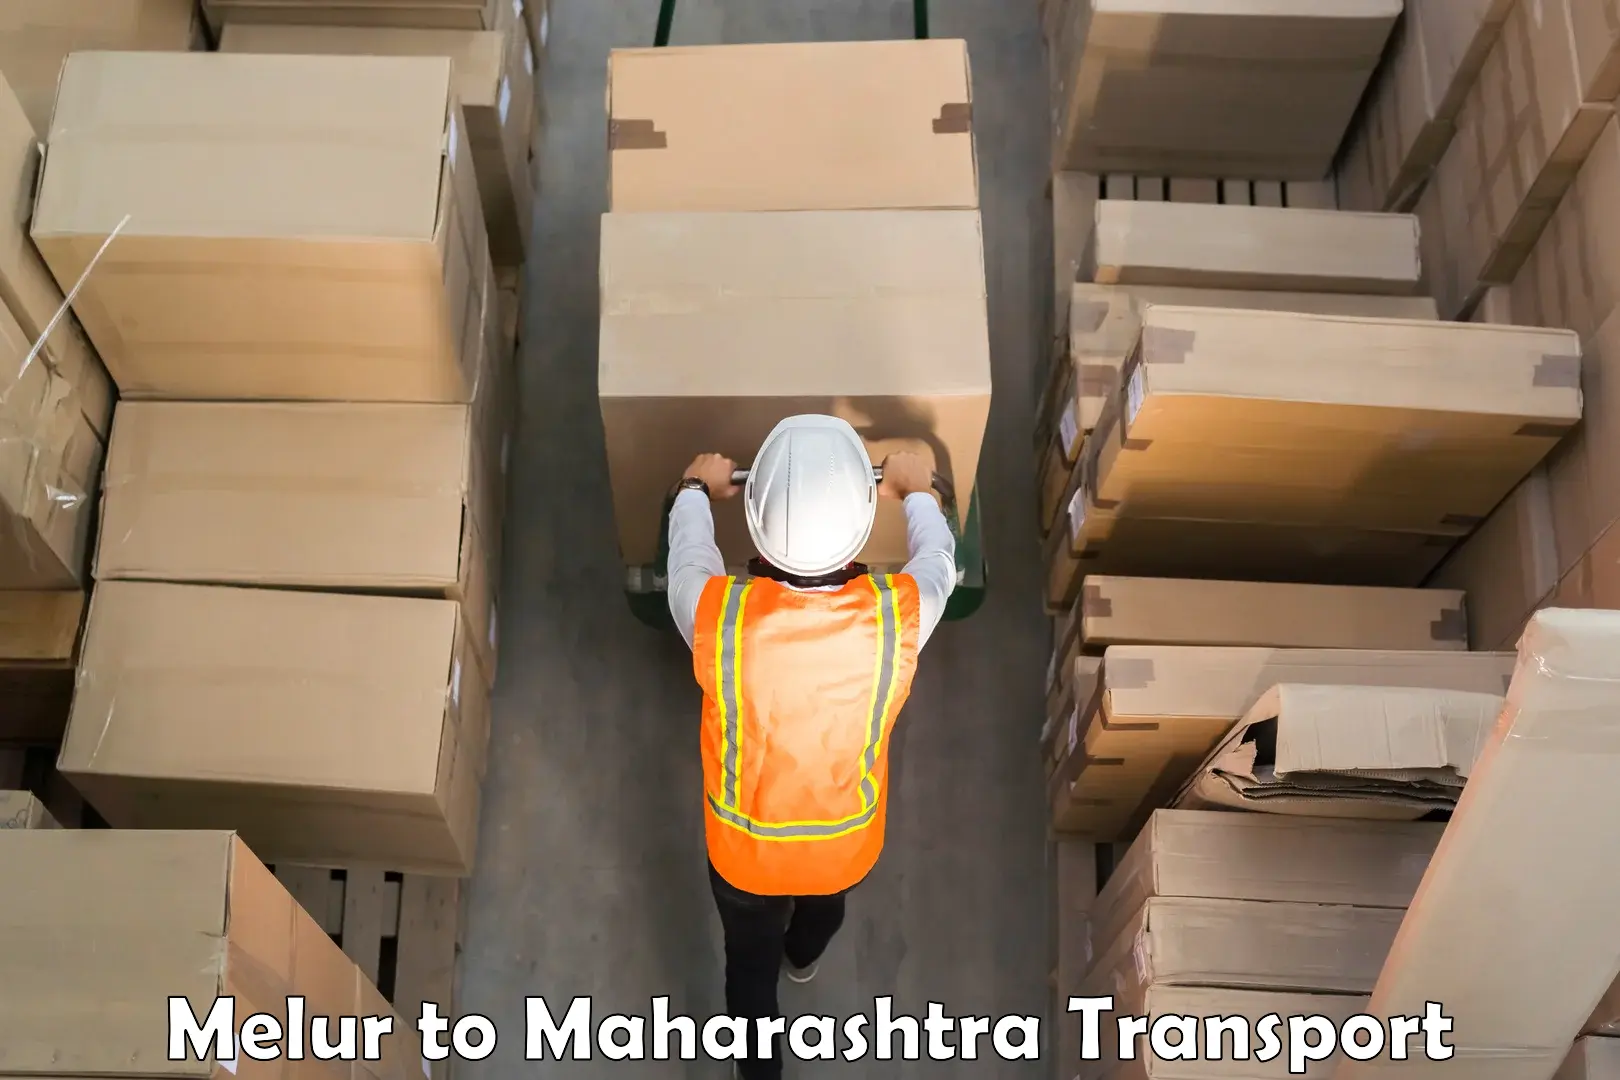 Truck transport companies in India Melur to Jasai